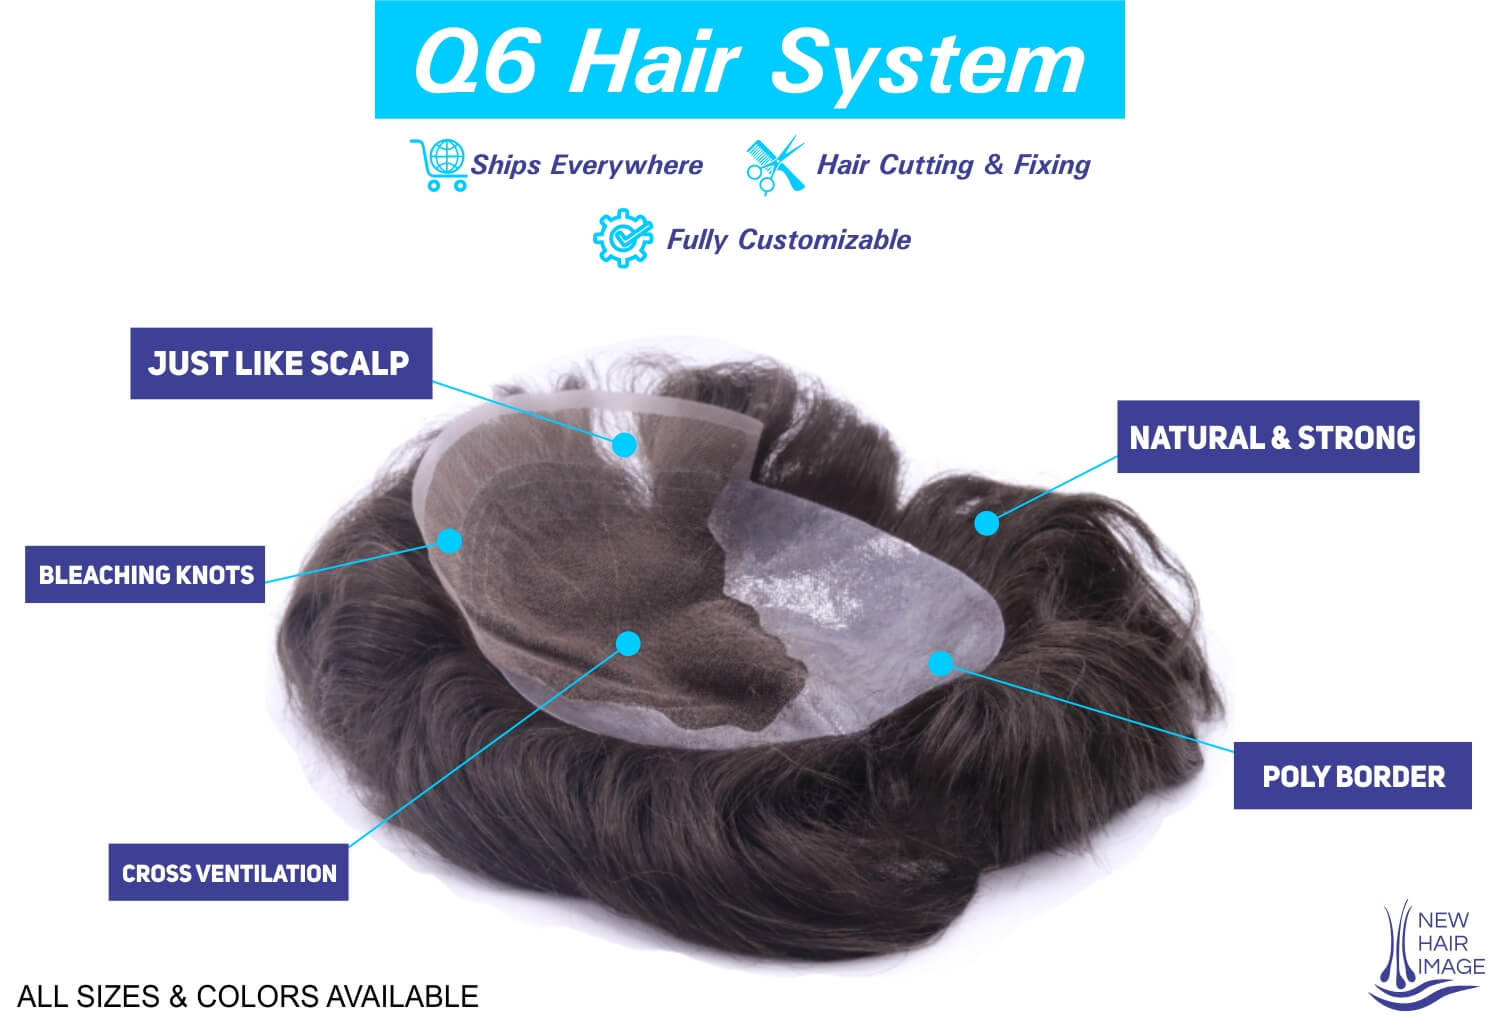 Q6 Hair Patch | French Lace Hair System | New Hair Image Pakistan